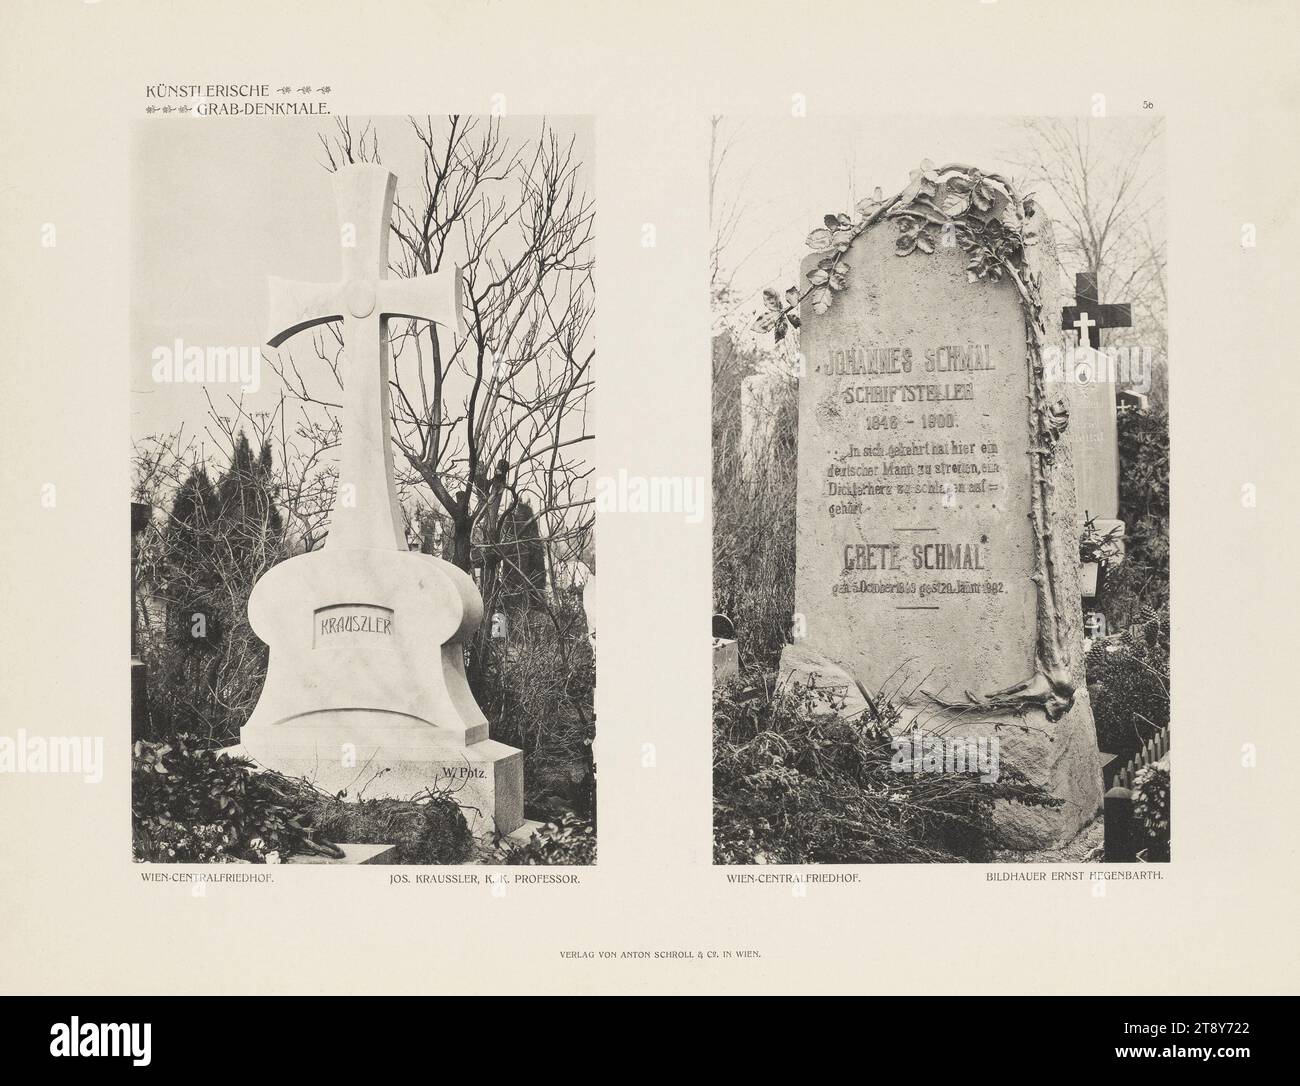 Zentralfriedhof, gravestone Krauszler, Jos. Kraussler, gravestone Schmal, sculptor Ernst Hegenbarth (sheet no. 56 from: Artistic Grave Monuments. Modern Architecture & Sculpture of Cemeteries and Churches in Austria-Hungary, Series 2, Anton Schroll & Co., Vienna), Anton Schroll & Co., publishing house, Date around 1910, paperboard, Collotype, sheet size 31×41 cm, Fine Arts, Disease and Death, 11th District: Simmering, grave-building, monumental tomb, Zentralfriedhof, sculpture, grave, tomb, The Vienna Collection Stock Photo